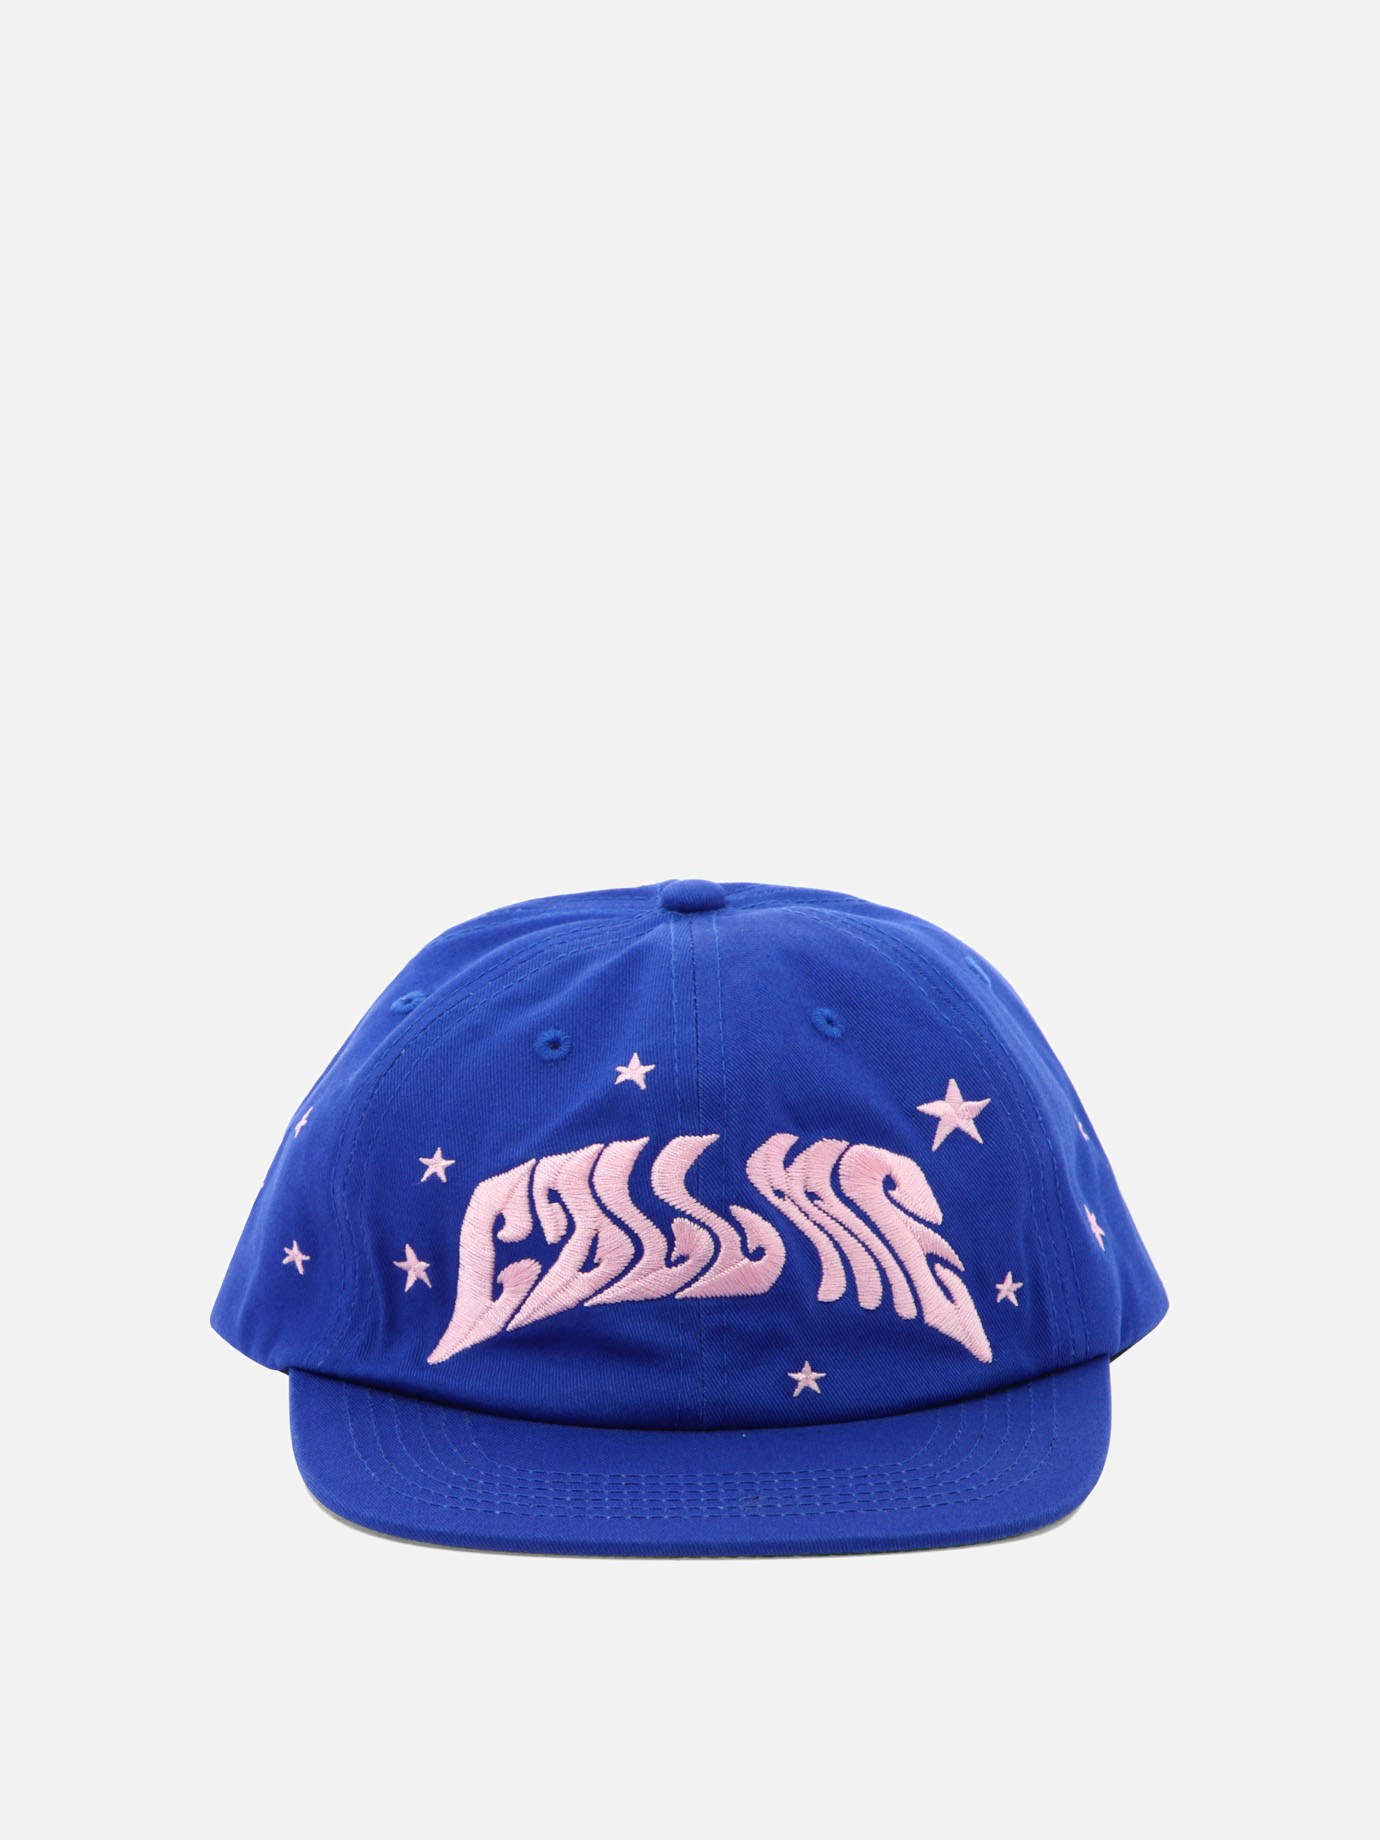 Cappellino  Stars Blue Snapback by Call Me 917 - 5